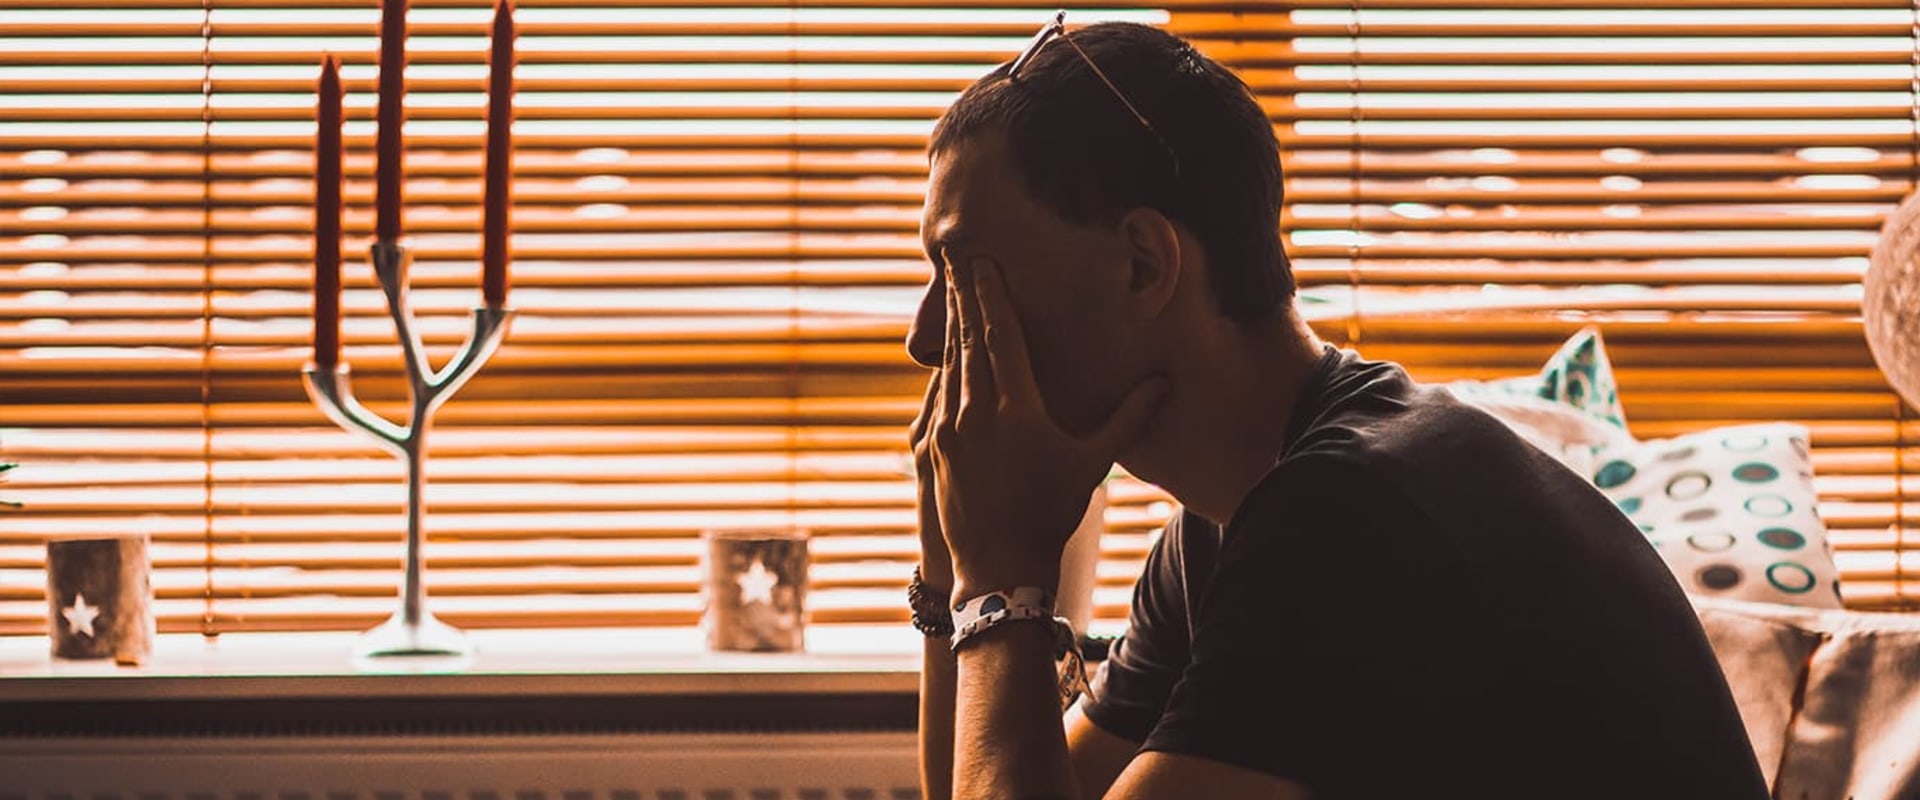 What are the most common mental health issues for men?